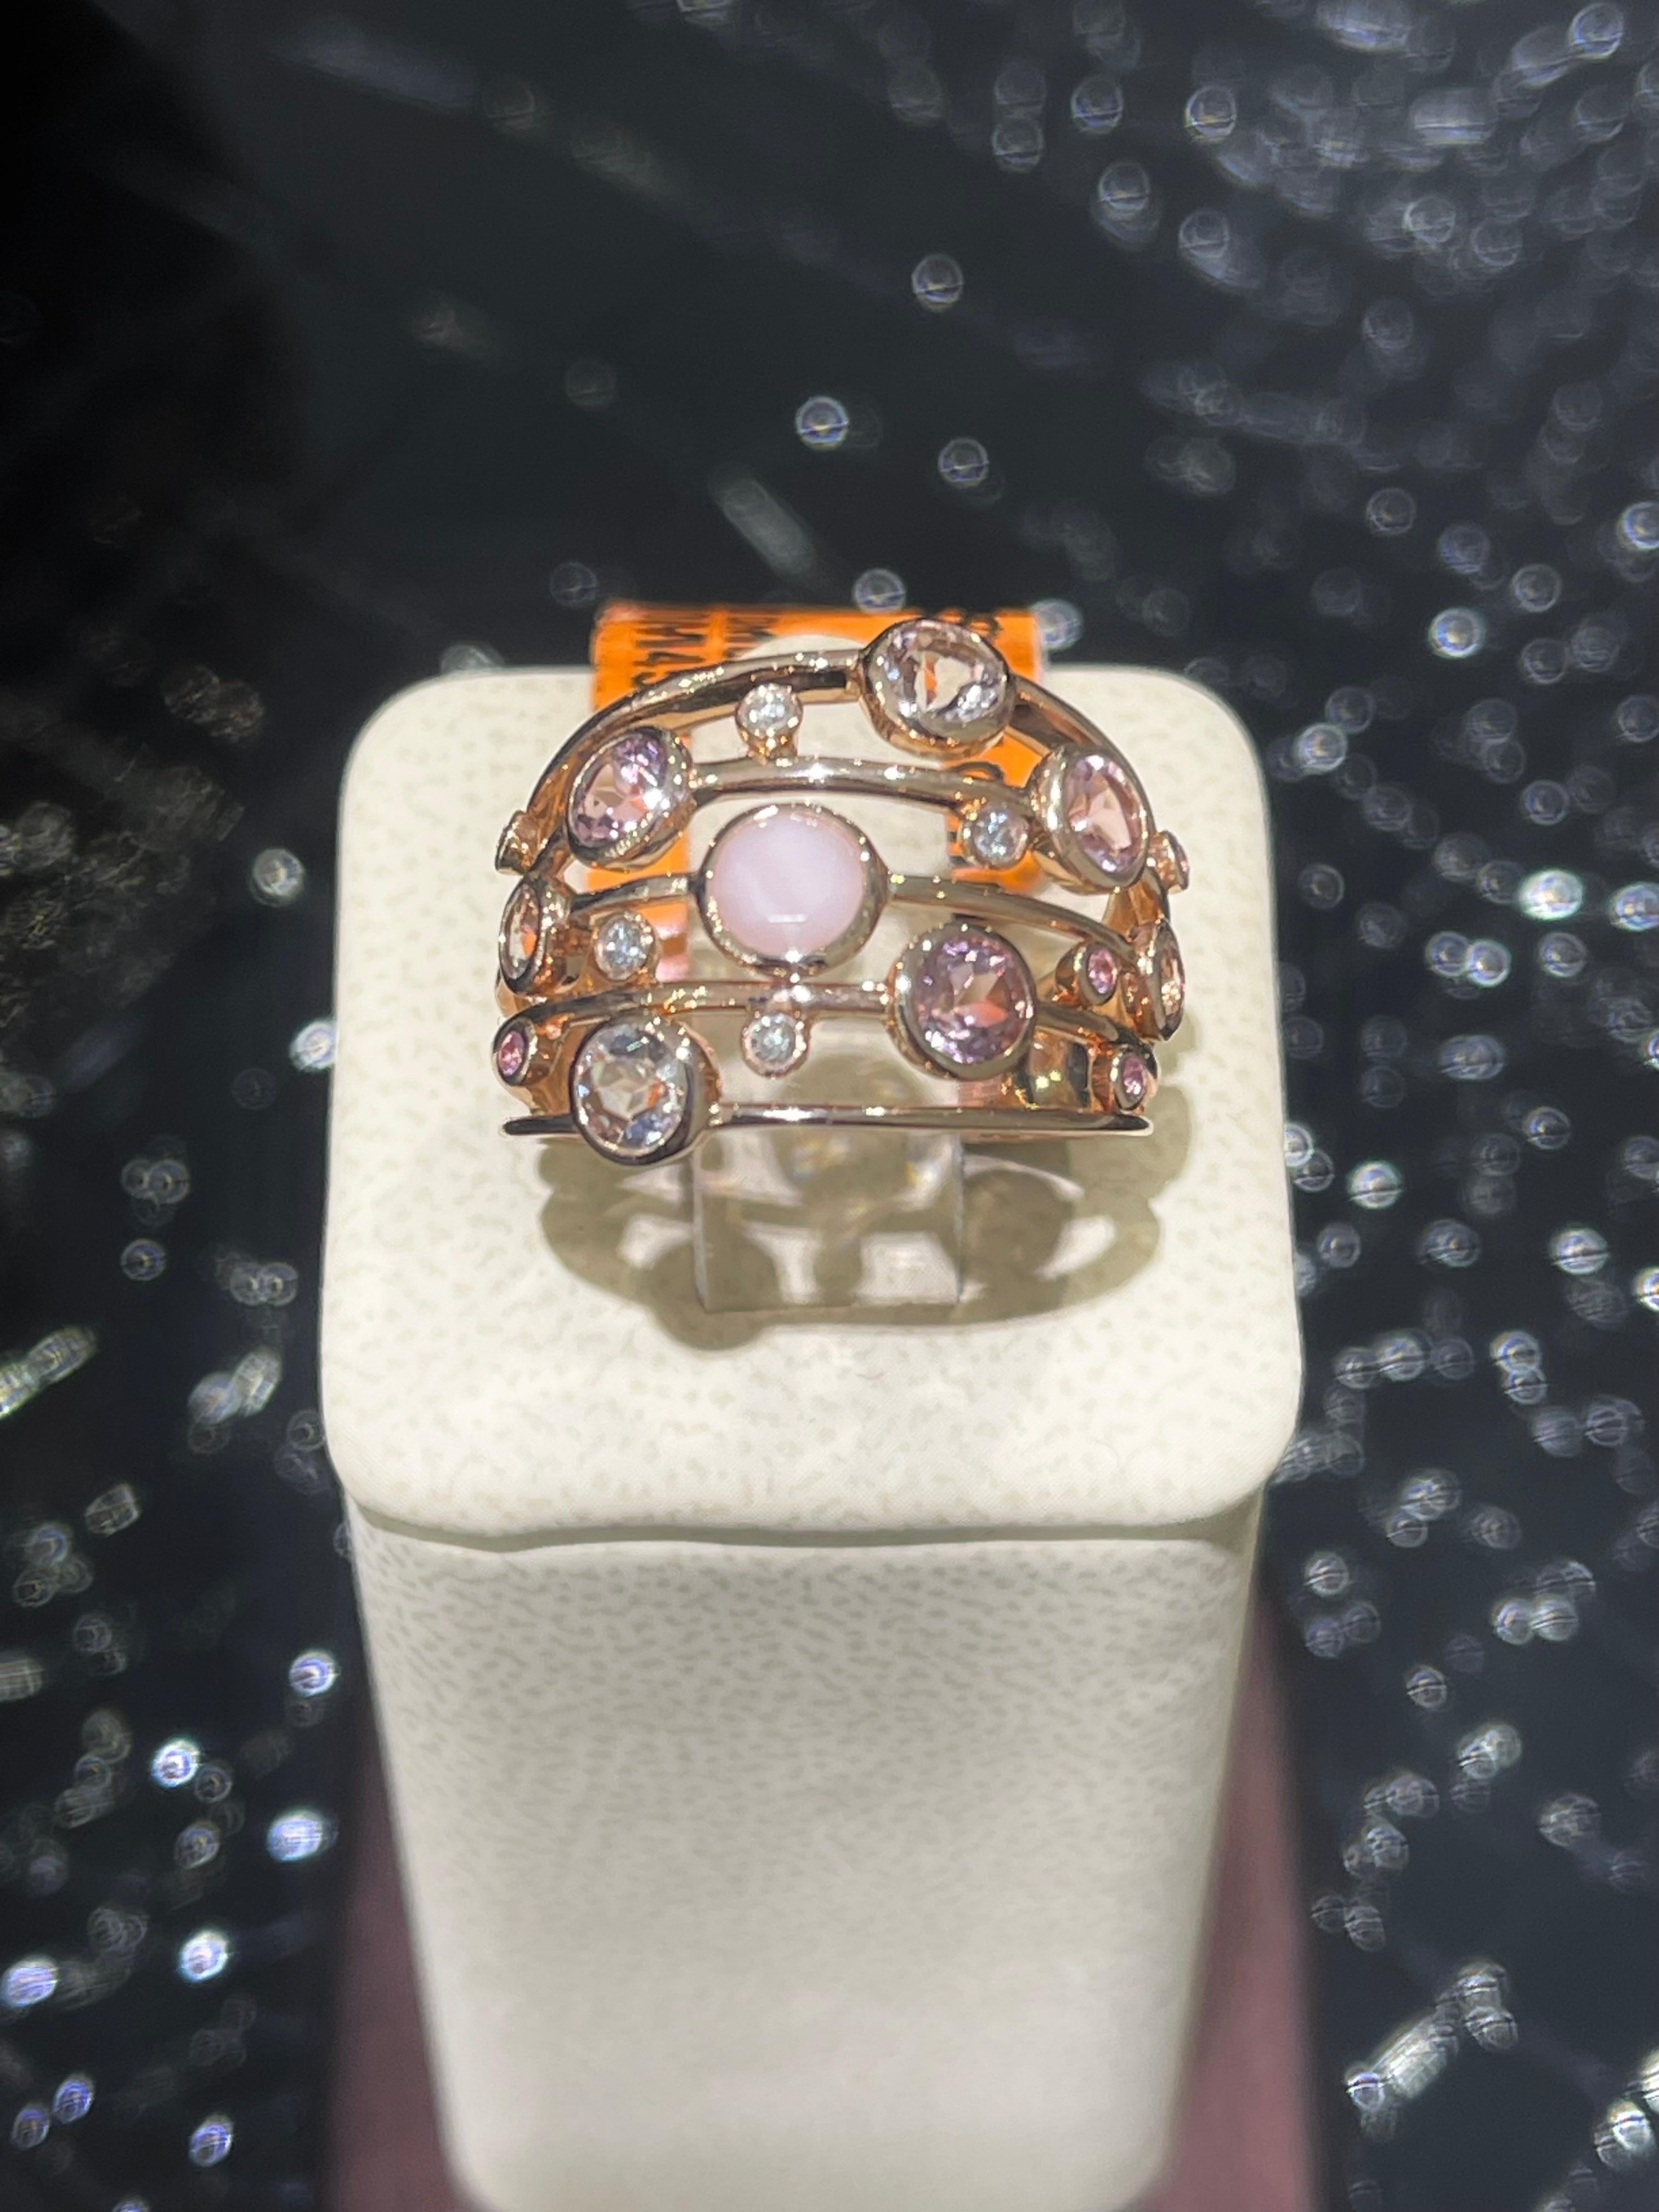 New Effy Pink Quartz & Diamond Ring In 14k Rose Gold. 
Beautiful addition to your jewelry collection. 
Ring size 7.